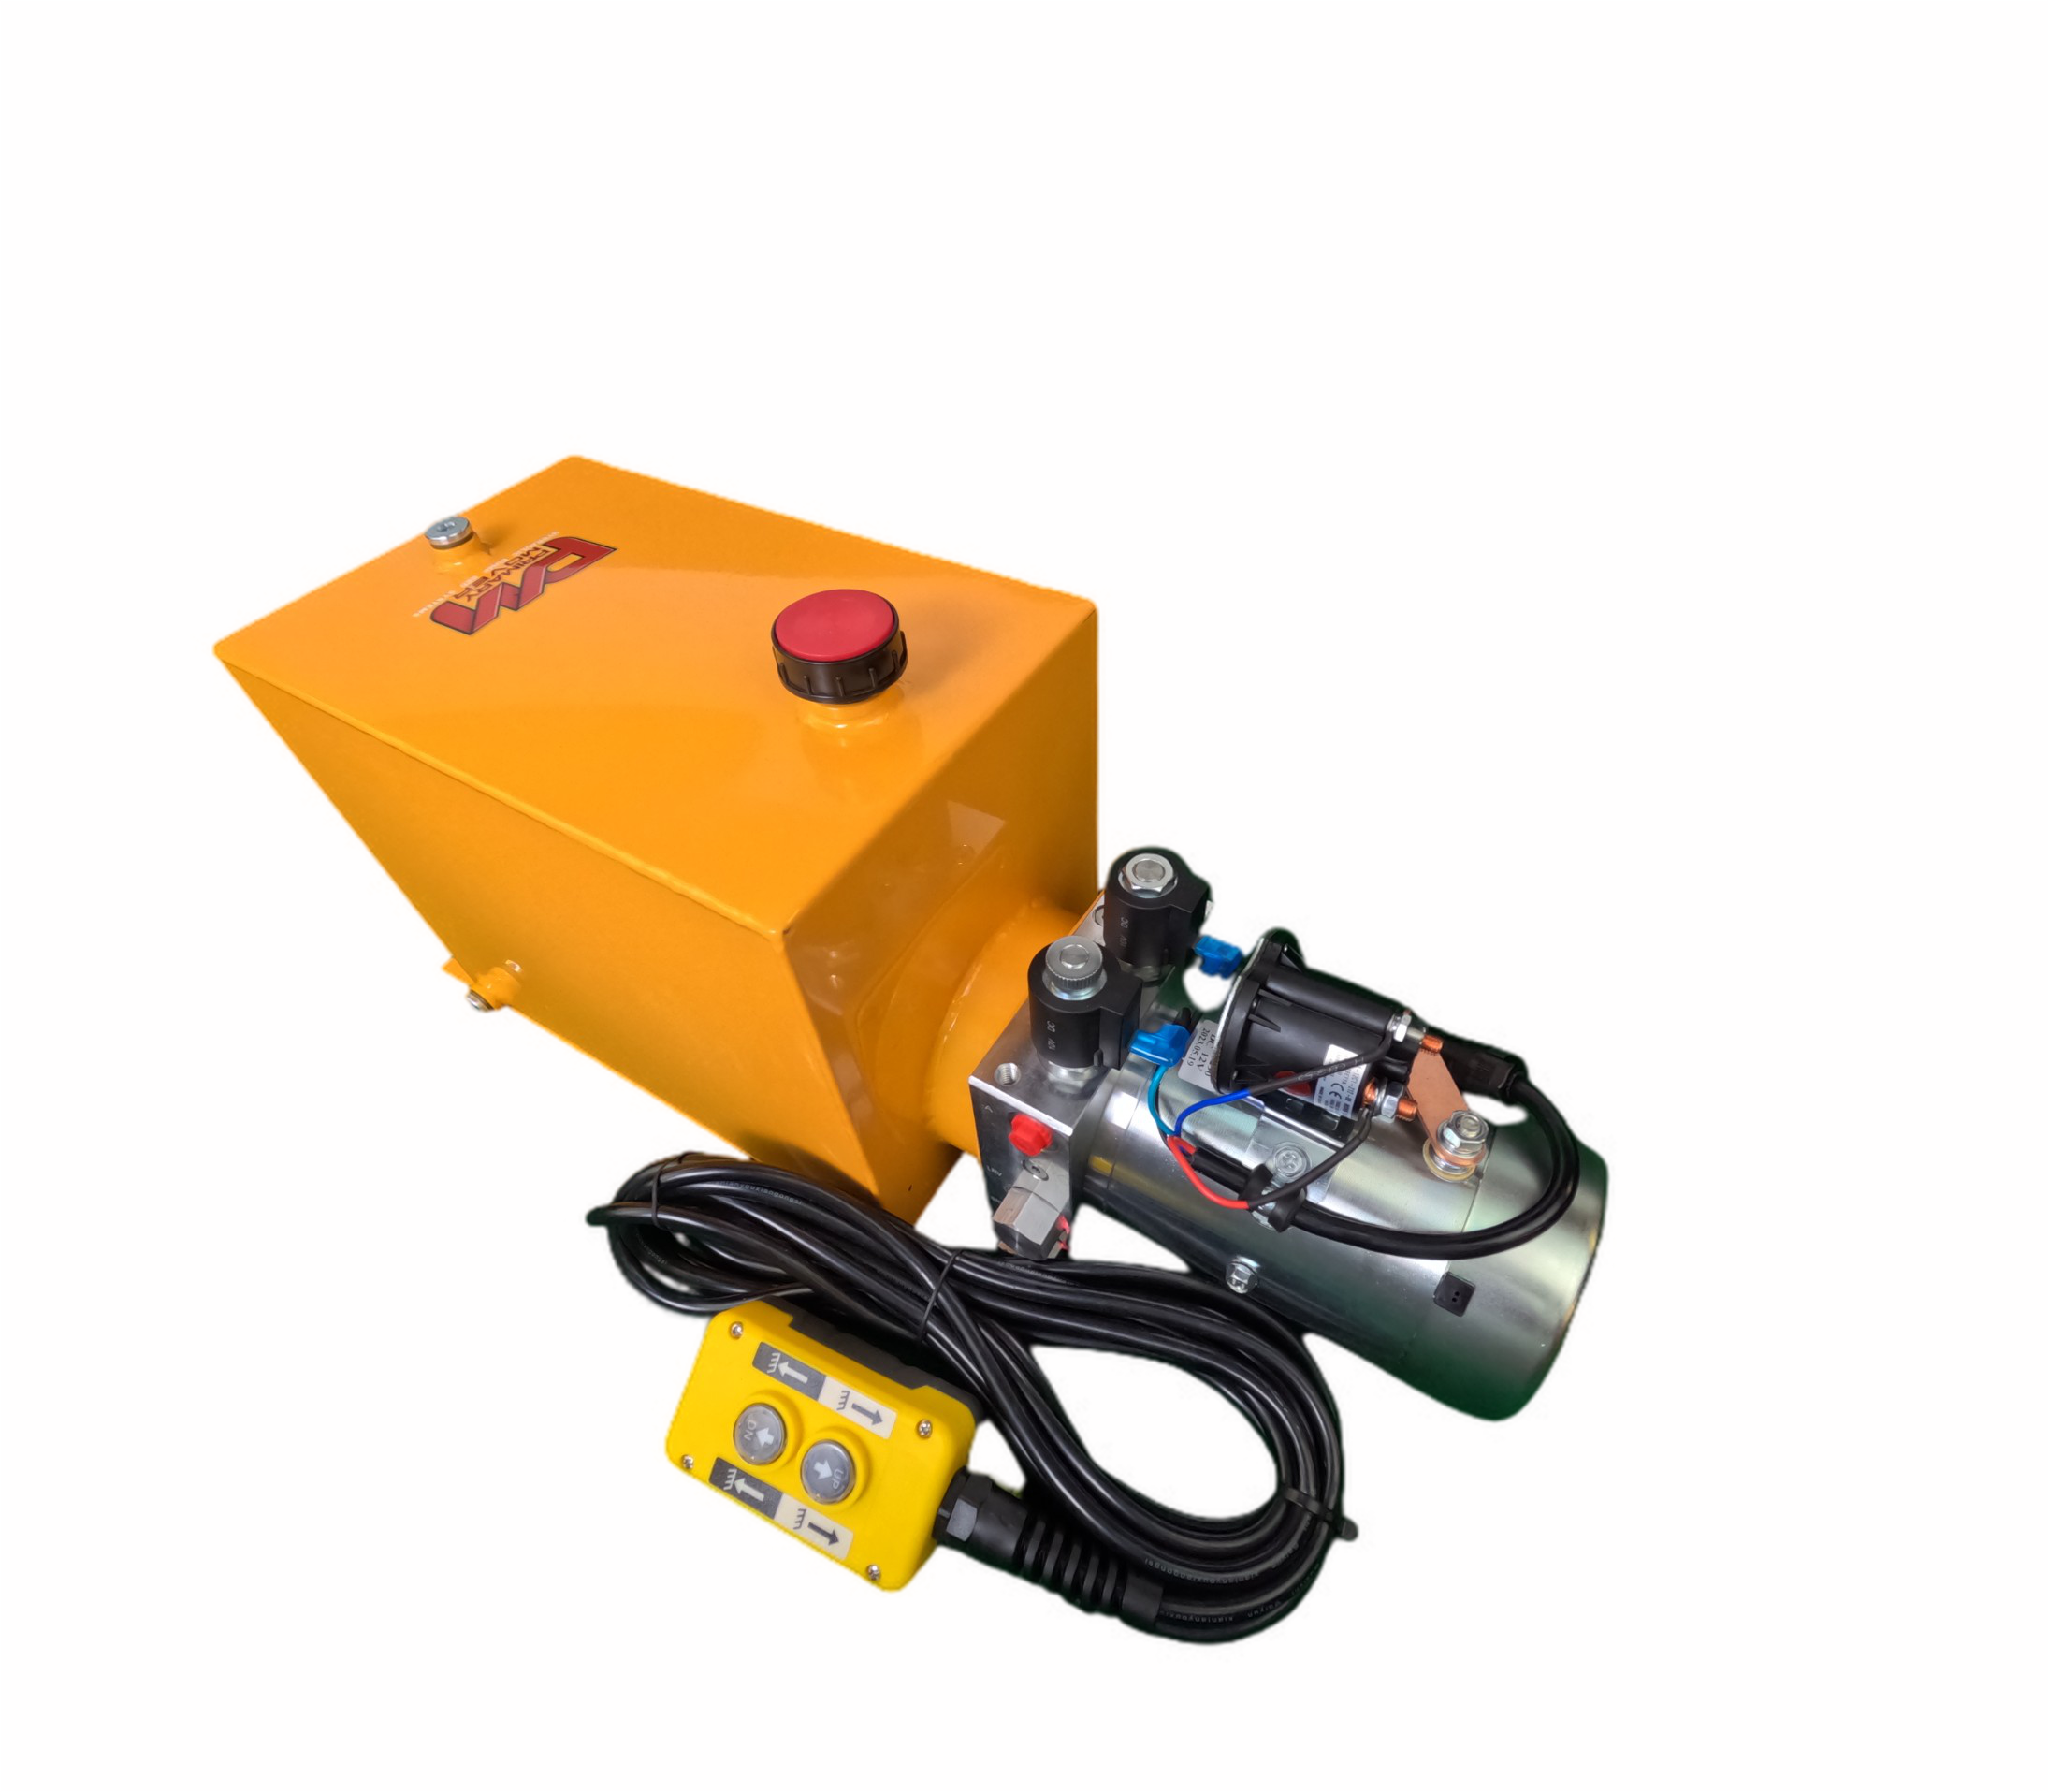 DLH 12V Double-Acting Hydraulic Pump with Steel Reservoir, featuring dual-acting power-up/power-down functionality, 3200 PSI max relief setting, 2.0 GPM, and versatile compatibility for hydraulic systems.